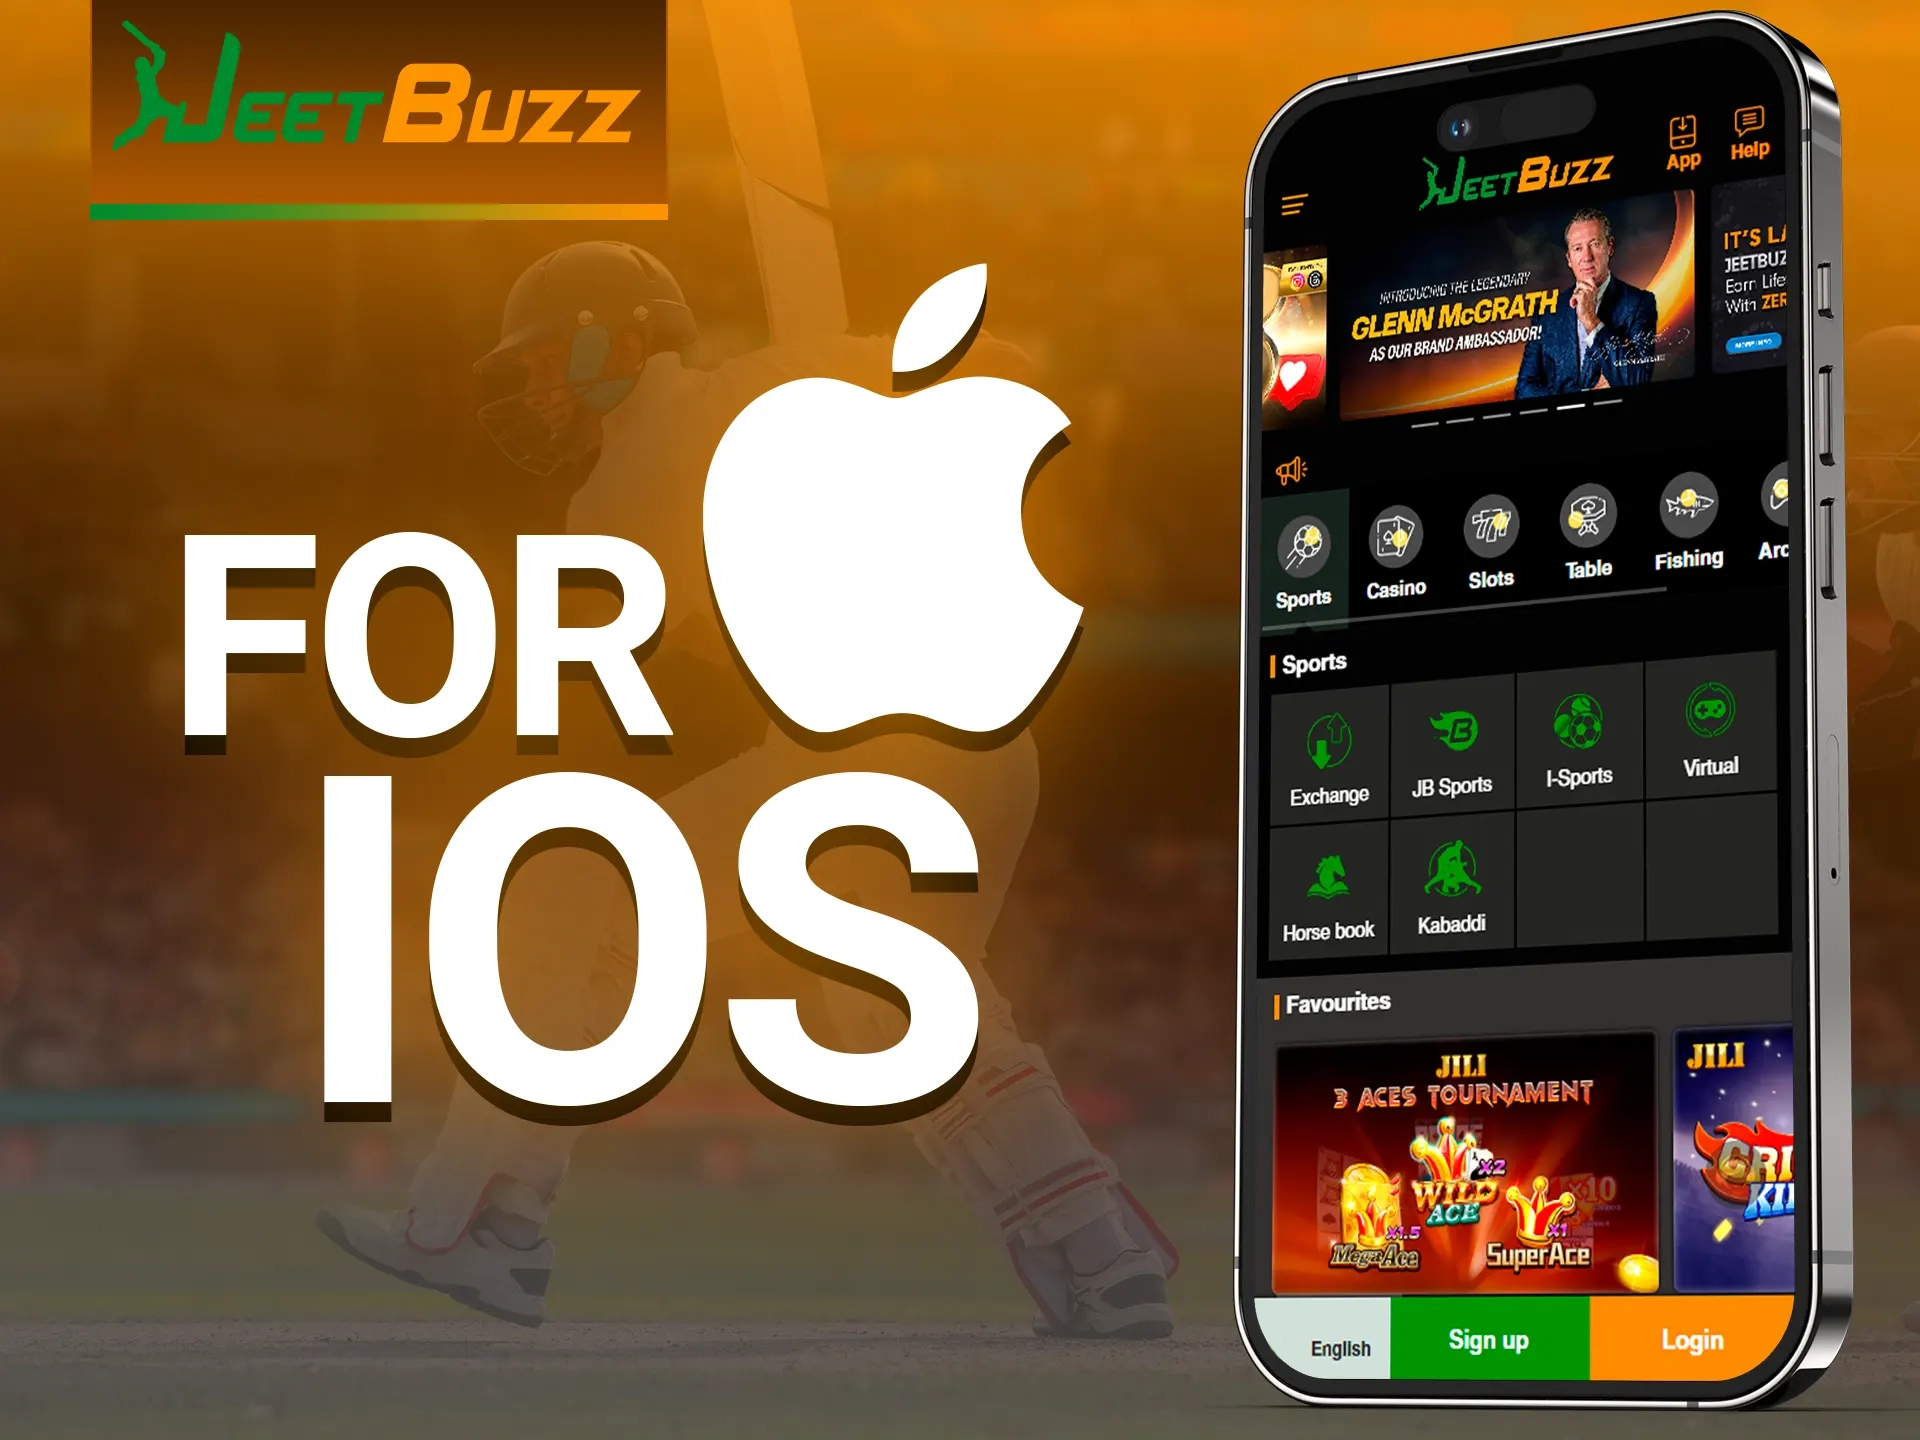 Jeetbuzz is available on iOS devices.